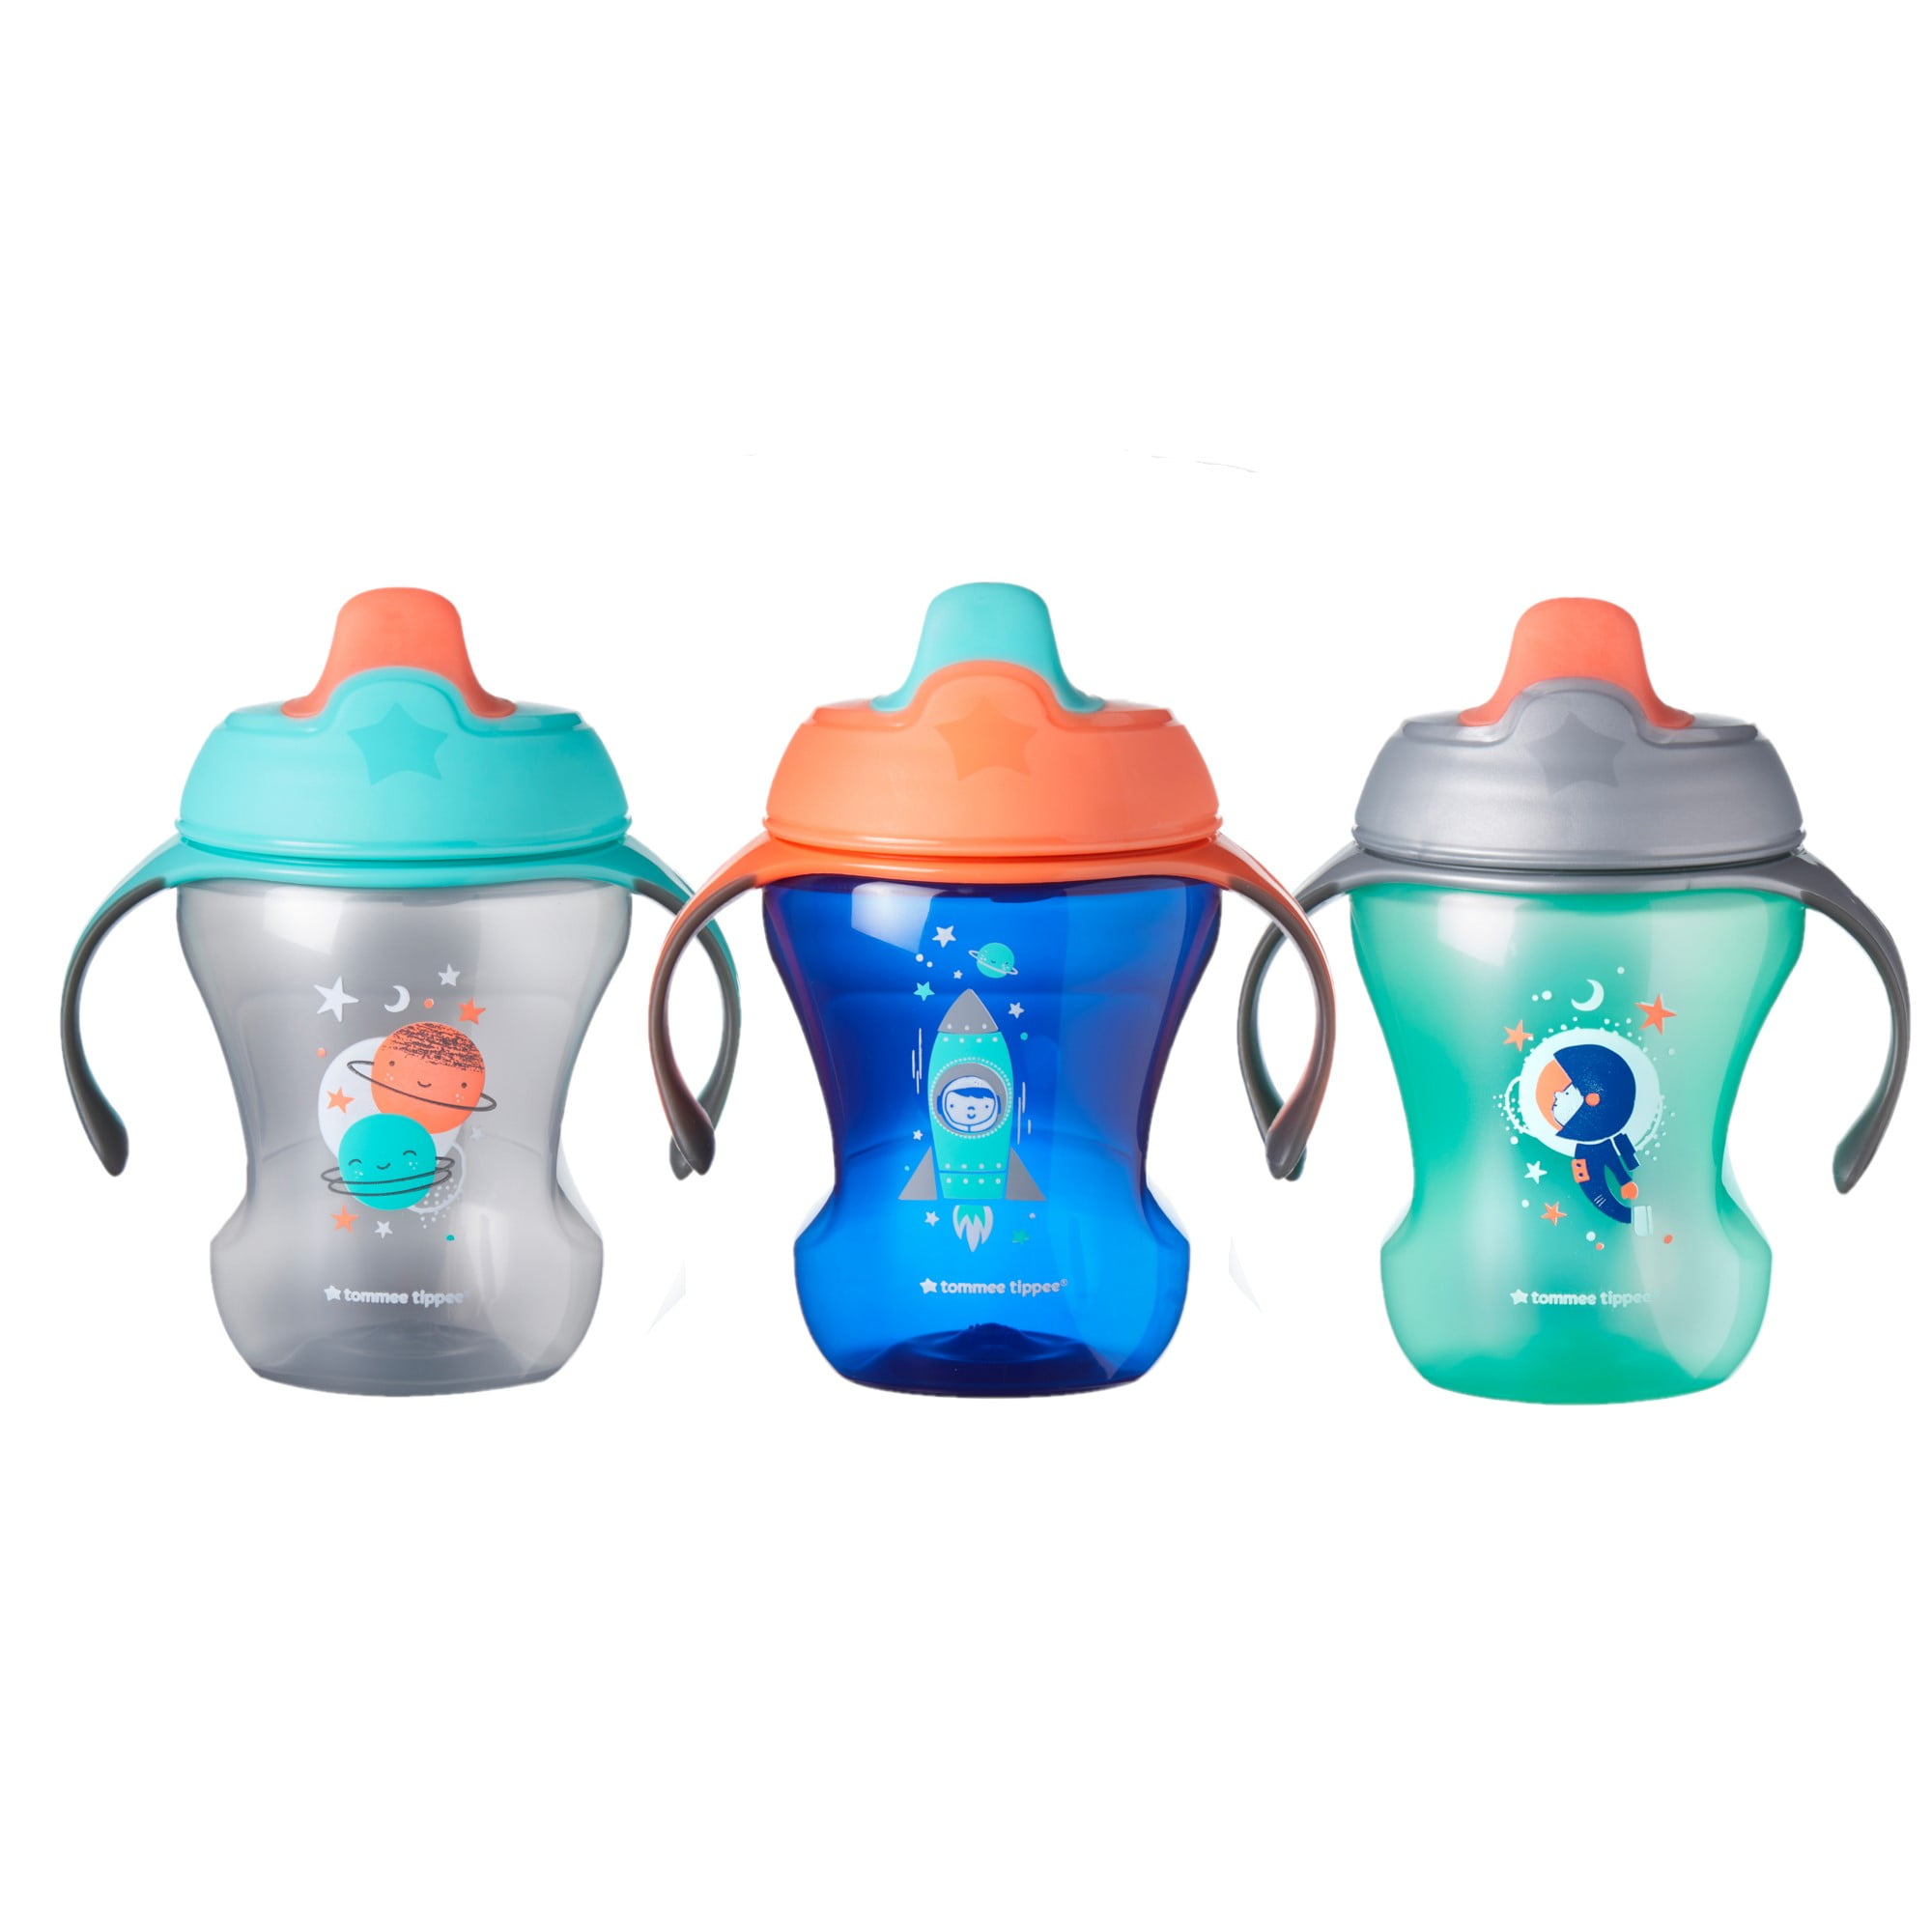 SET OF 3 SIppy Cups-Tommee Tippee, Munchkin AND The First Years